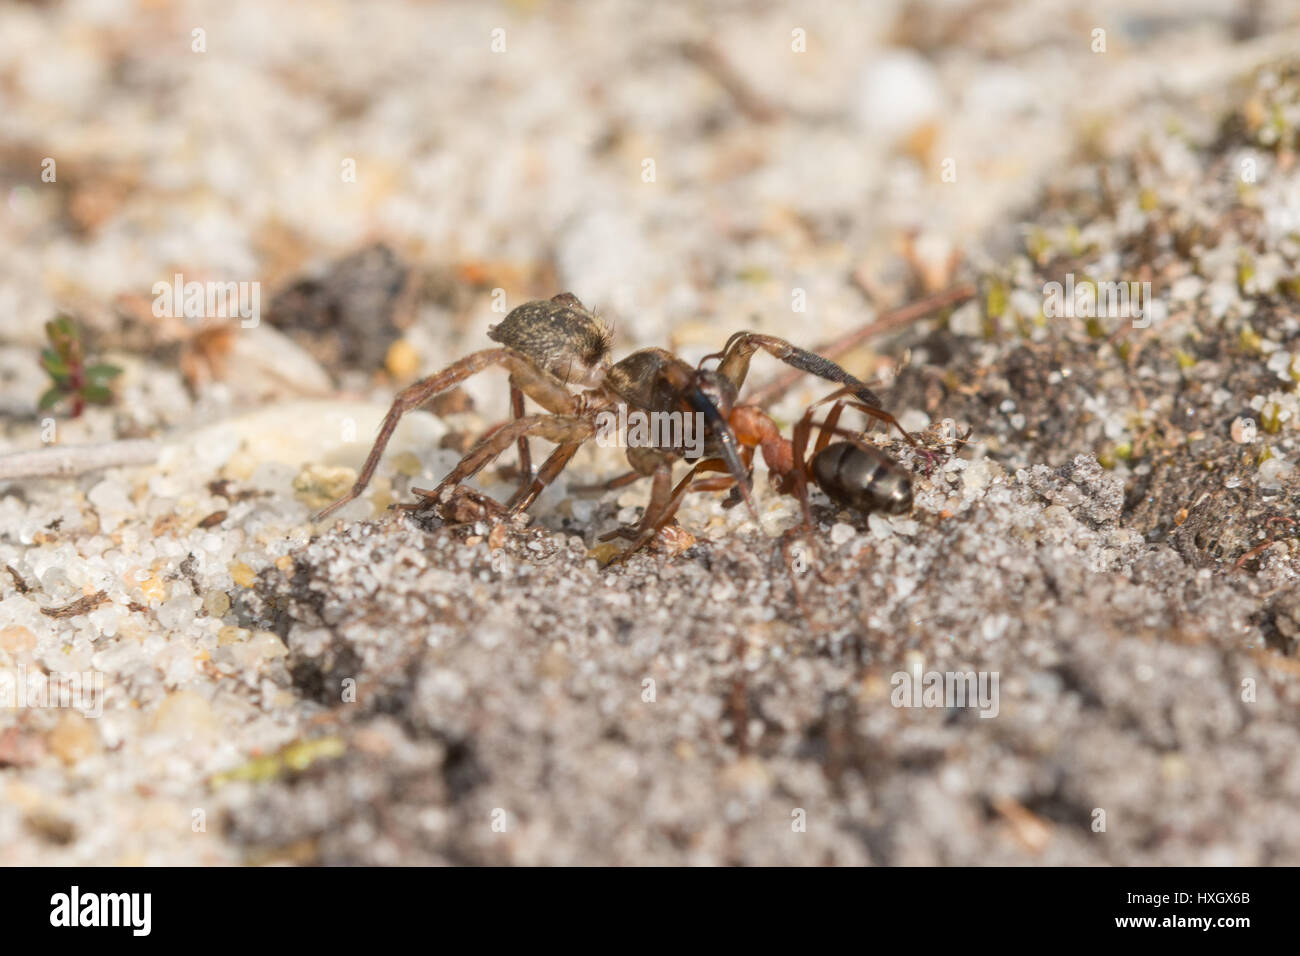 Wood ant pulling a dead spider along a sandy trace in Surrey, UK Stock Photo